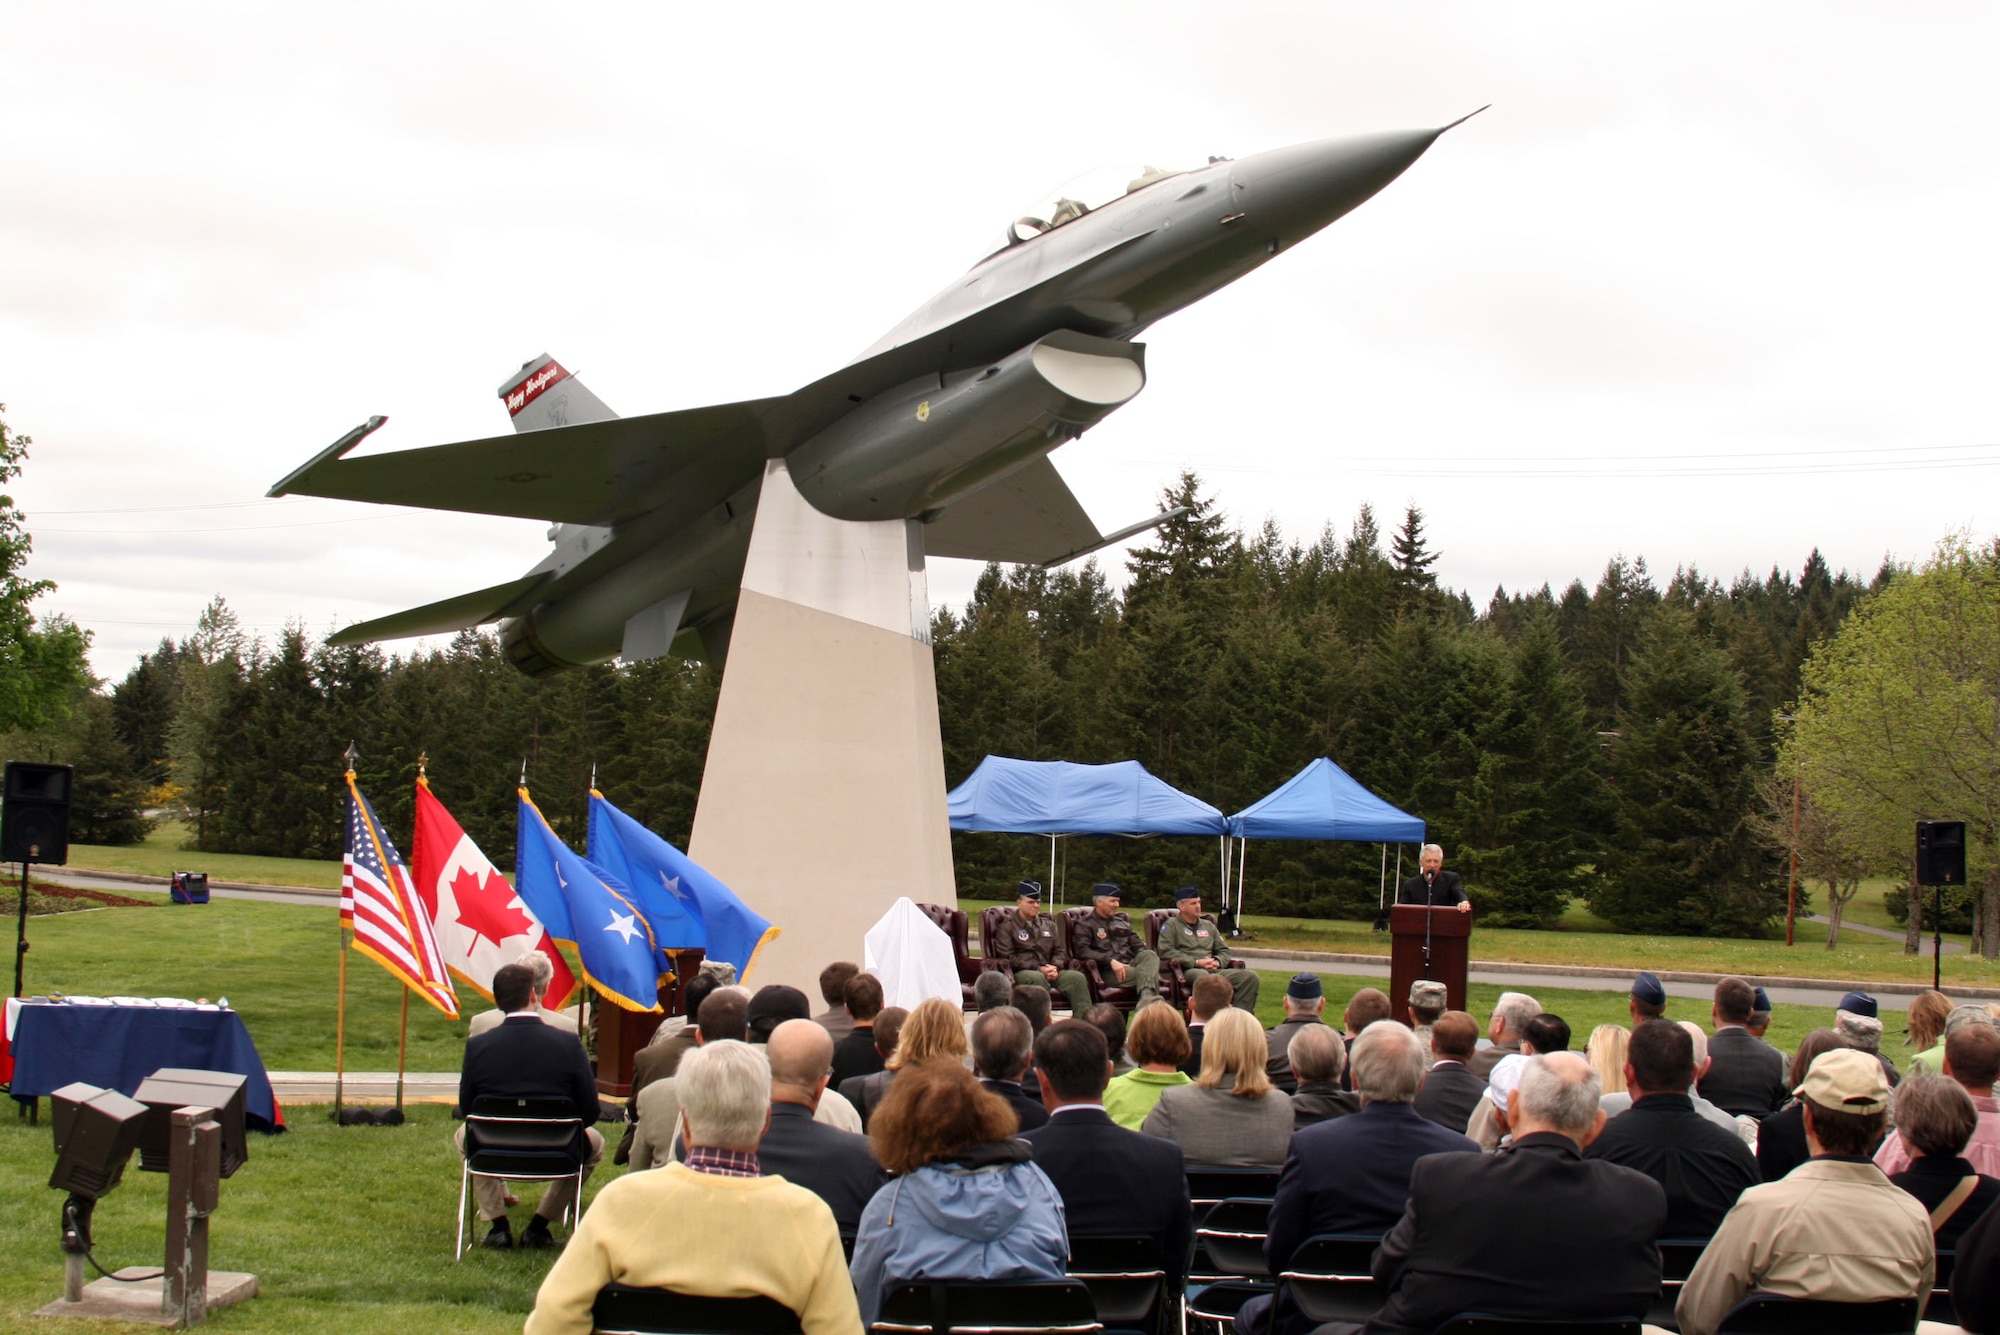 The F-16 fighter's place in air defense history is assured with this permanent display of aircraft #82-929, which was scrambled over the eastern coast on Sept. 11, 2001. The pilot on that eventful day, Lt. Col. Brad Derrig, attended the dedication ceremony at the Western Air Defense Sector on May 21 and talked about the shock and drama of combat air patrols on that date. (U.S. Air Force photo/Randy Rubattino)